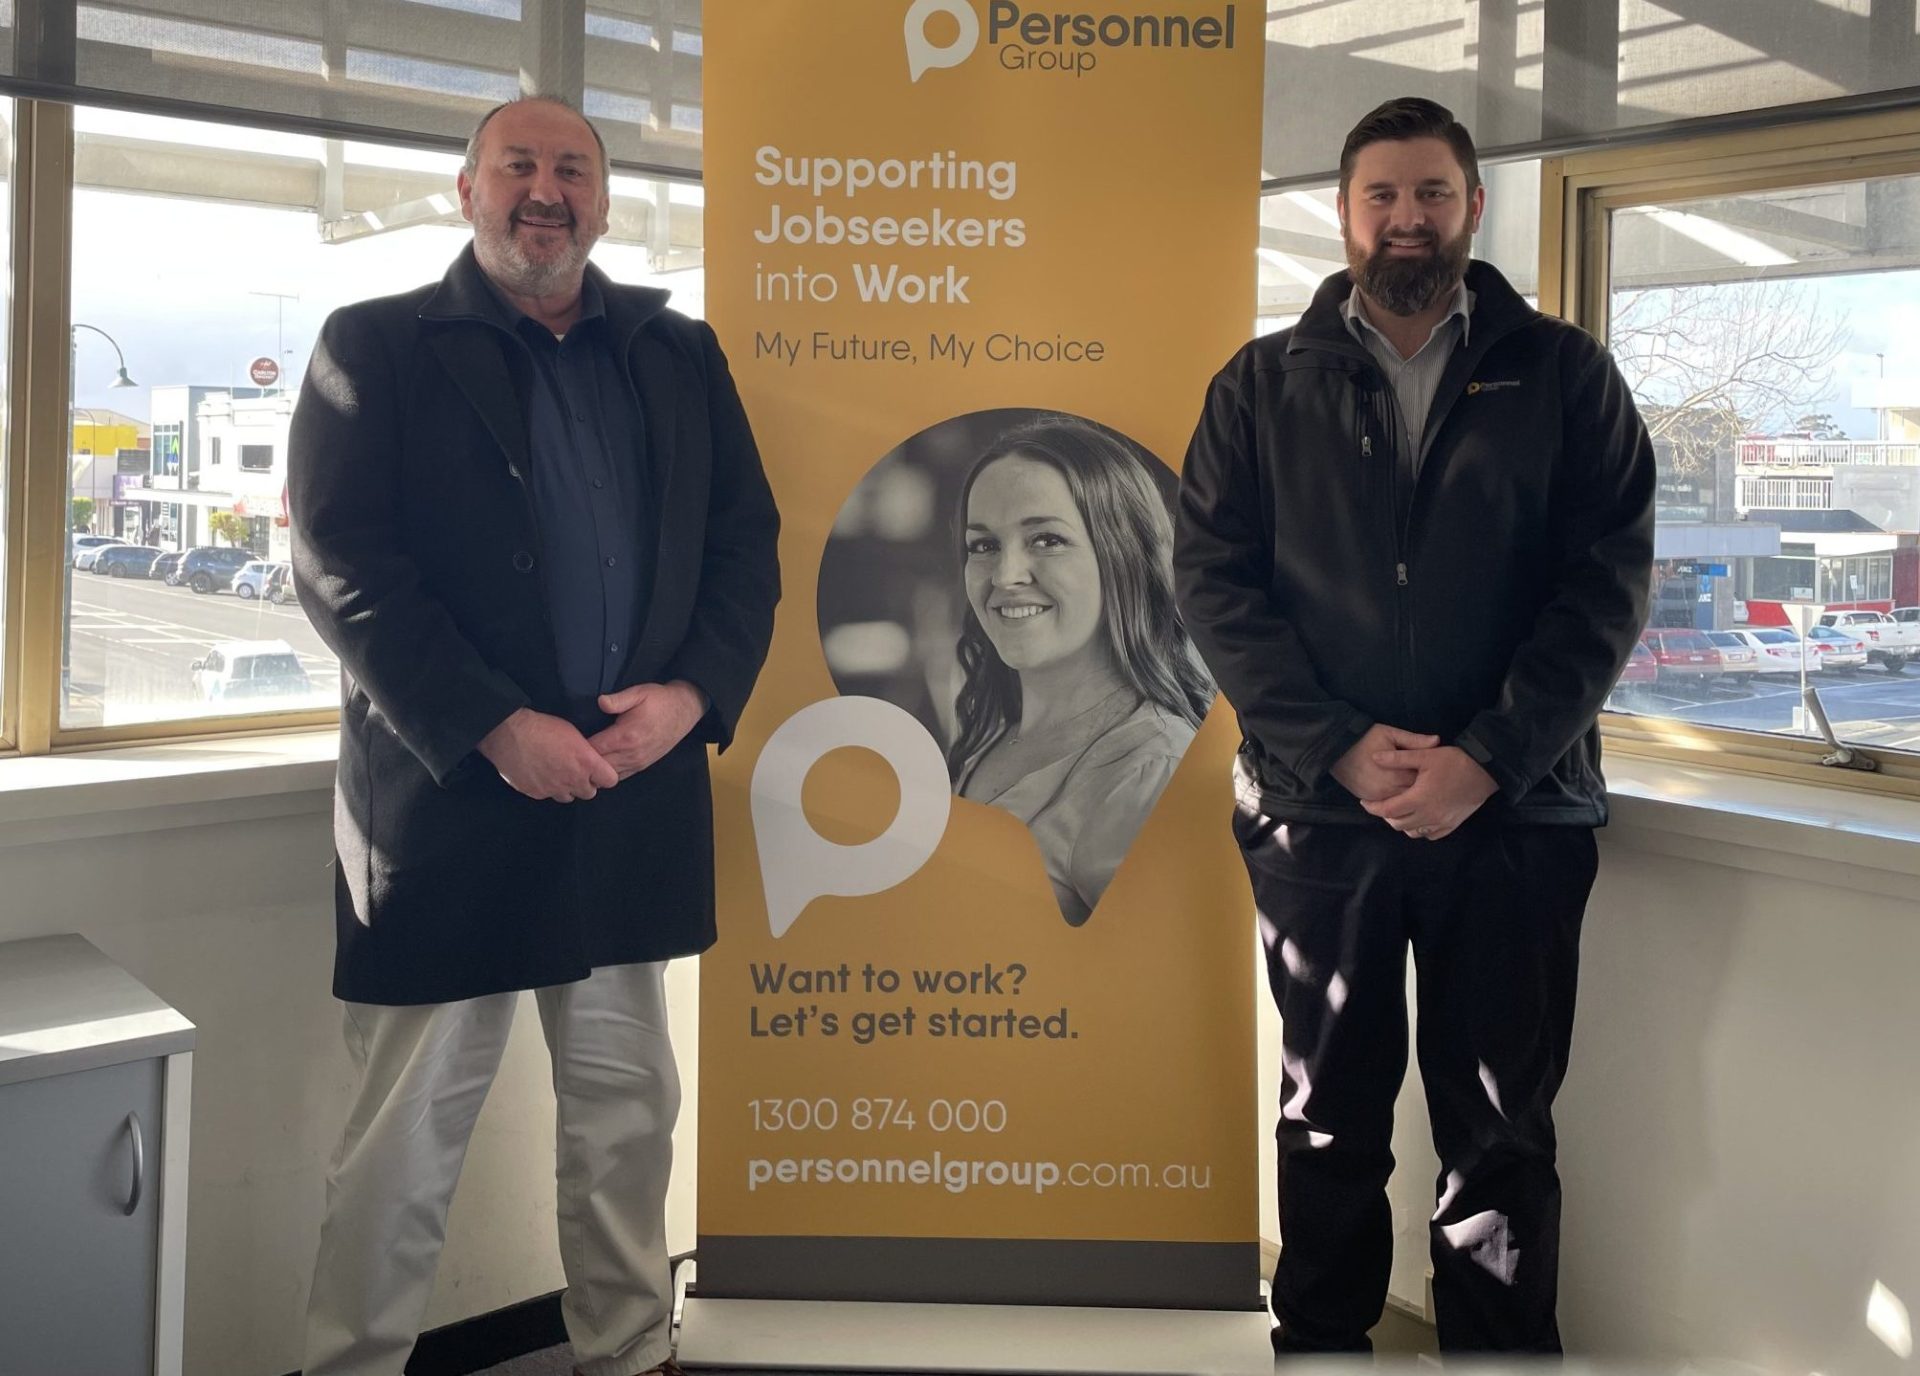 Industry specialists Brad Platschinda and Nick Scammell will deliver Employability Skills Training across Bairnsdale, Traralgon and Warragul.